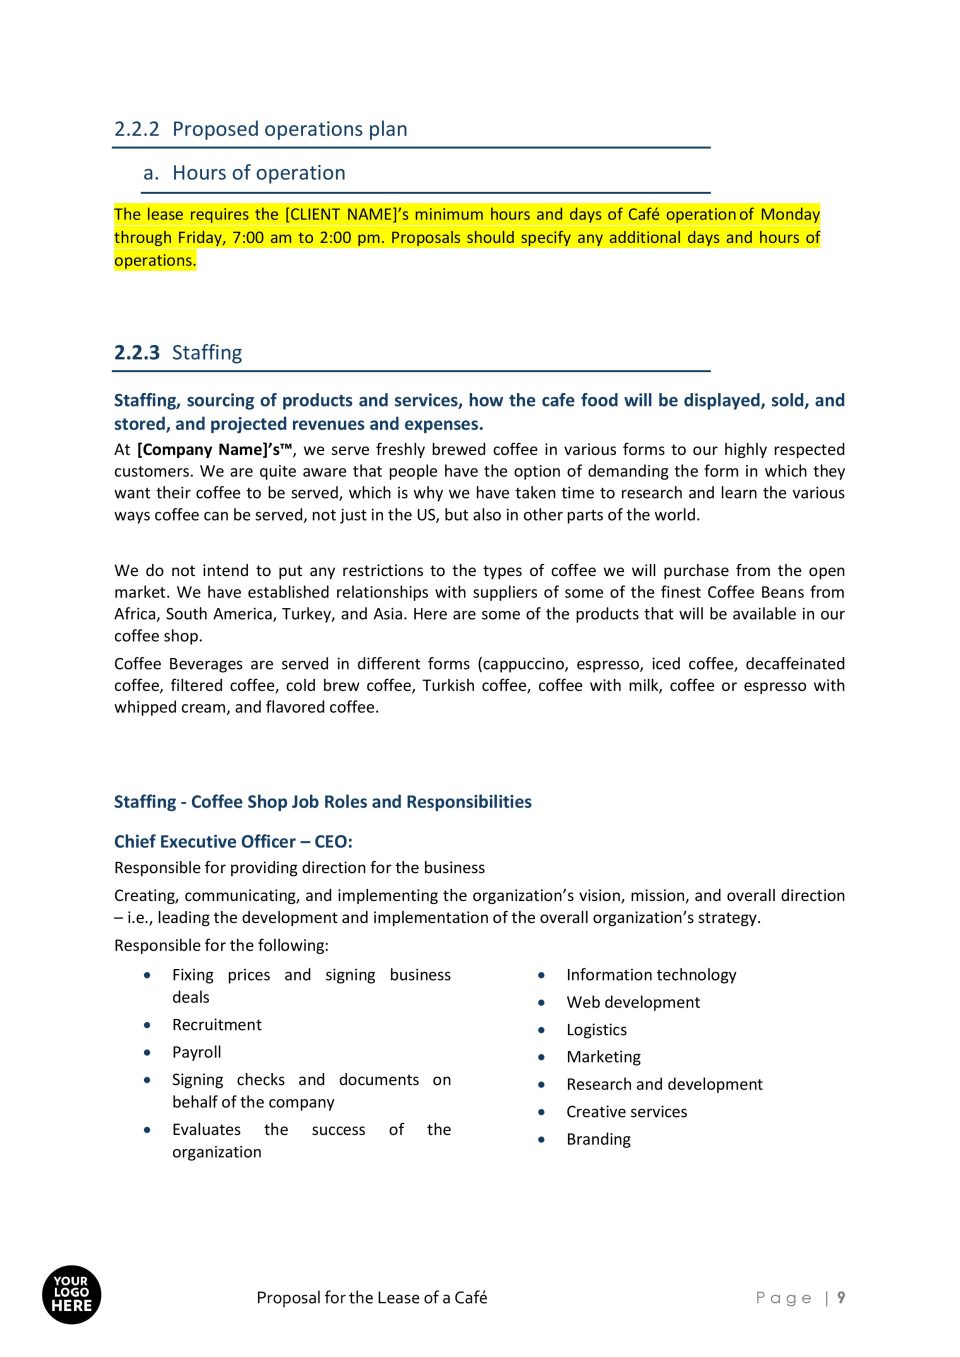 Business Proposal CAFE LEASE Request For Proposals For the Lease of a Cafe Template 09 scaled